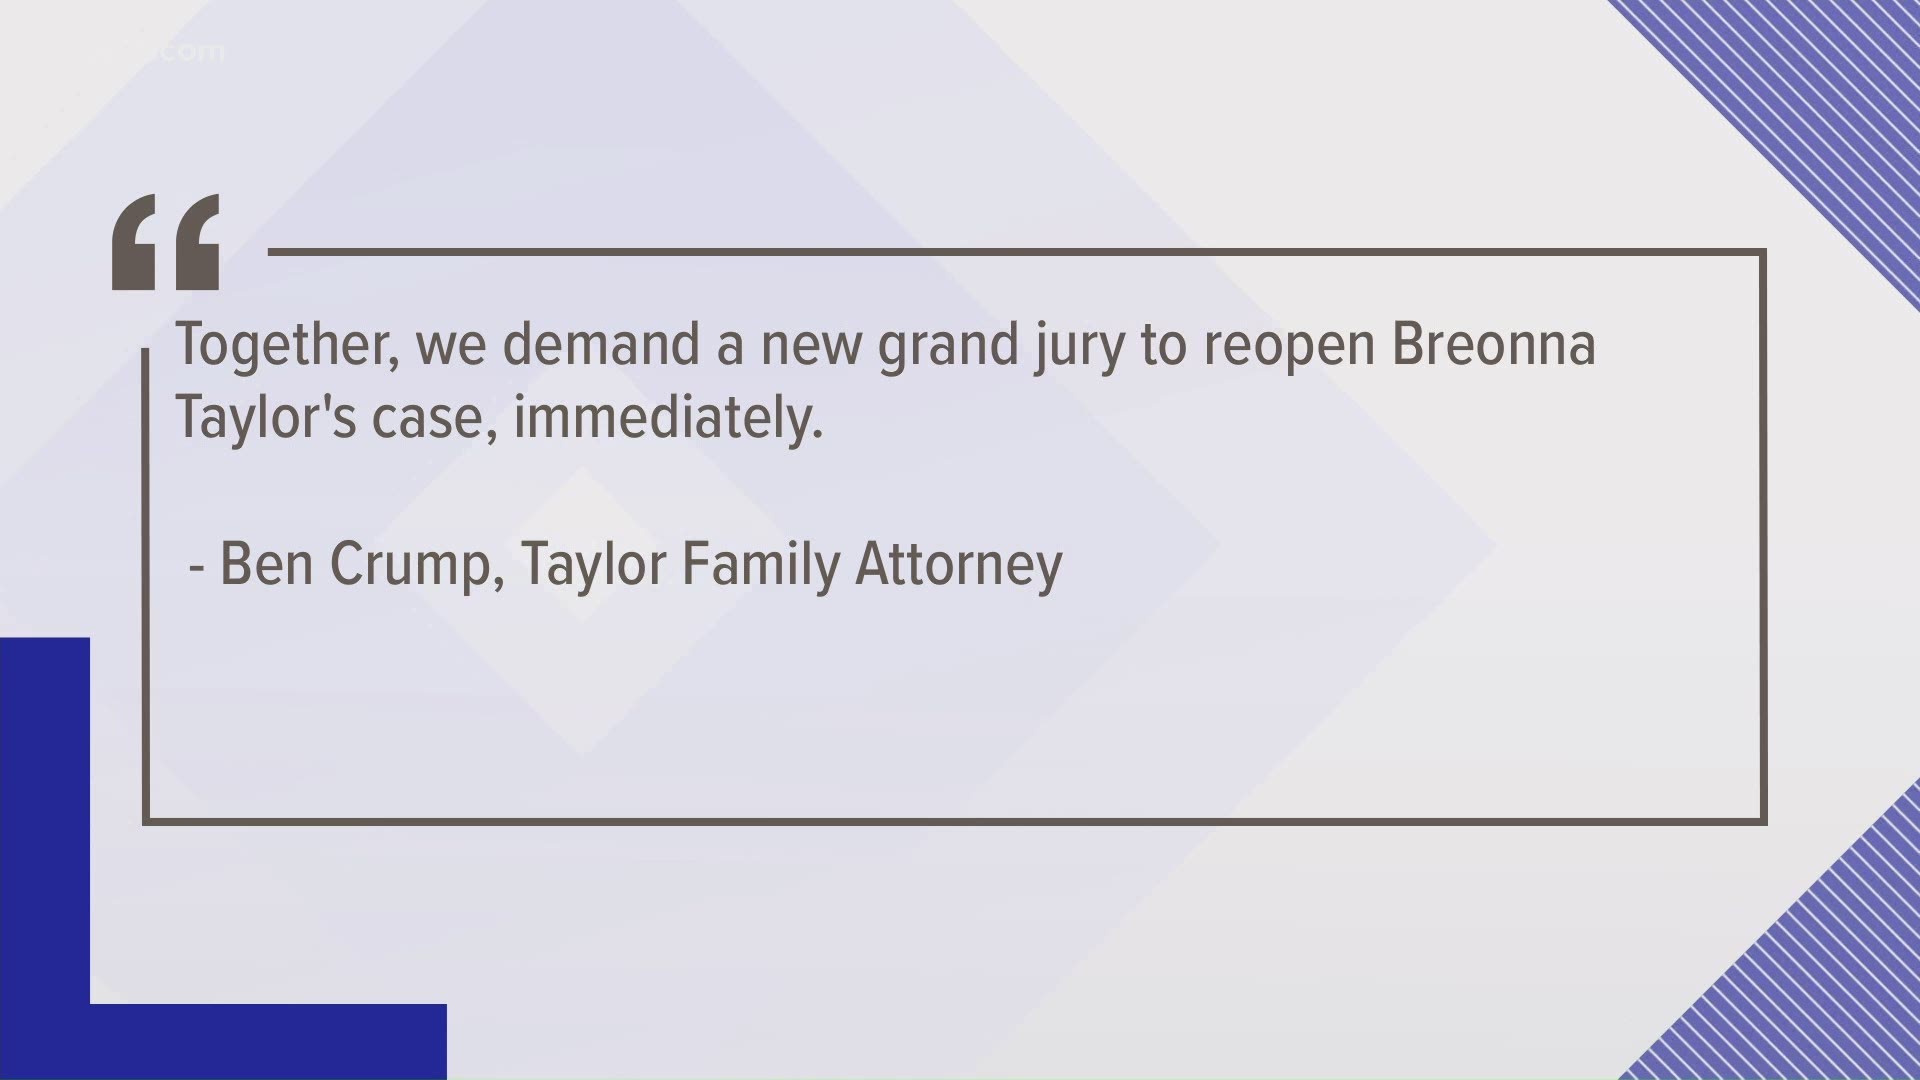 Benjamin Crump penned an open letter to Kentucky Governor Andy Beshear, asking for a new grand jury in the Breonna Taylor case.